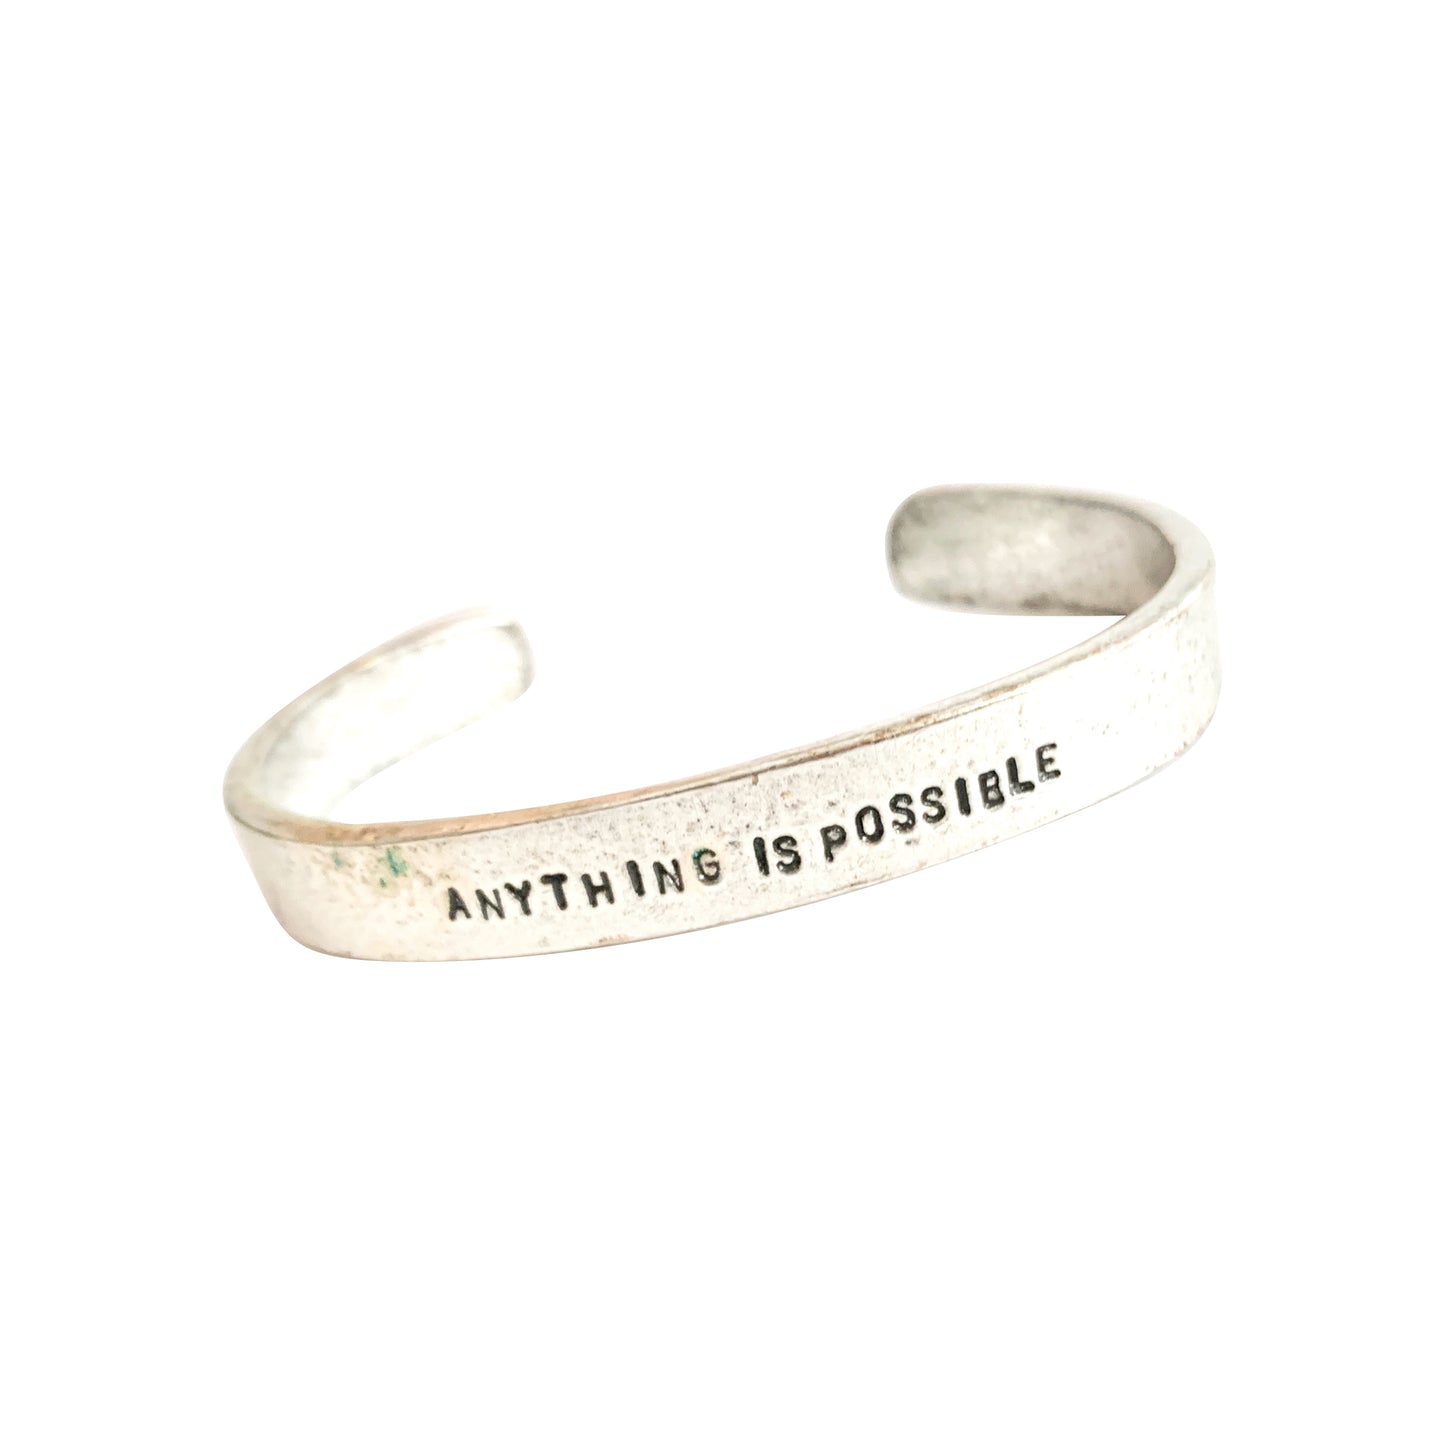 Anything is possible cuff bracelet